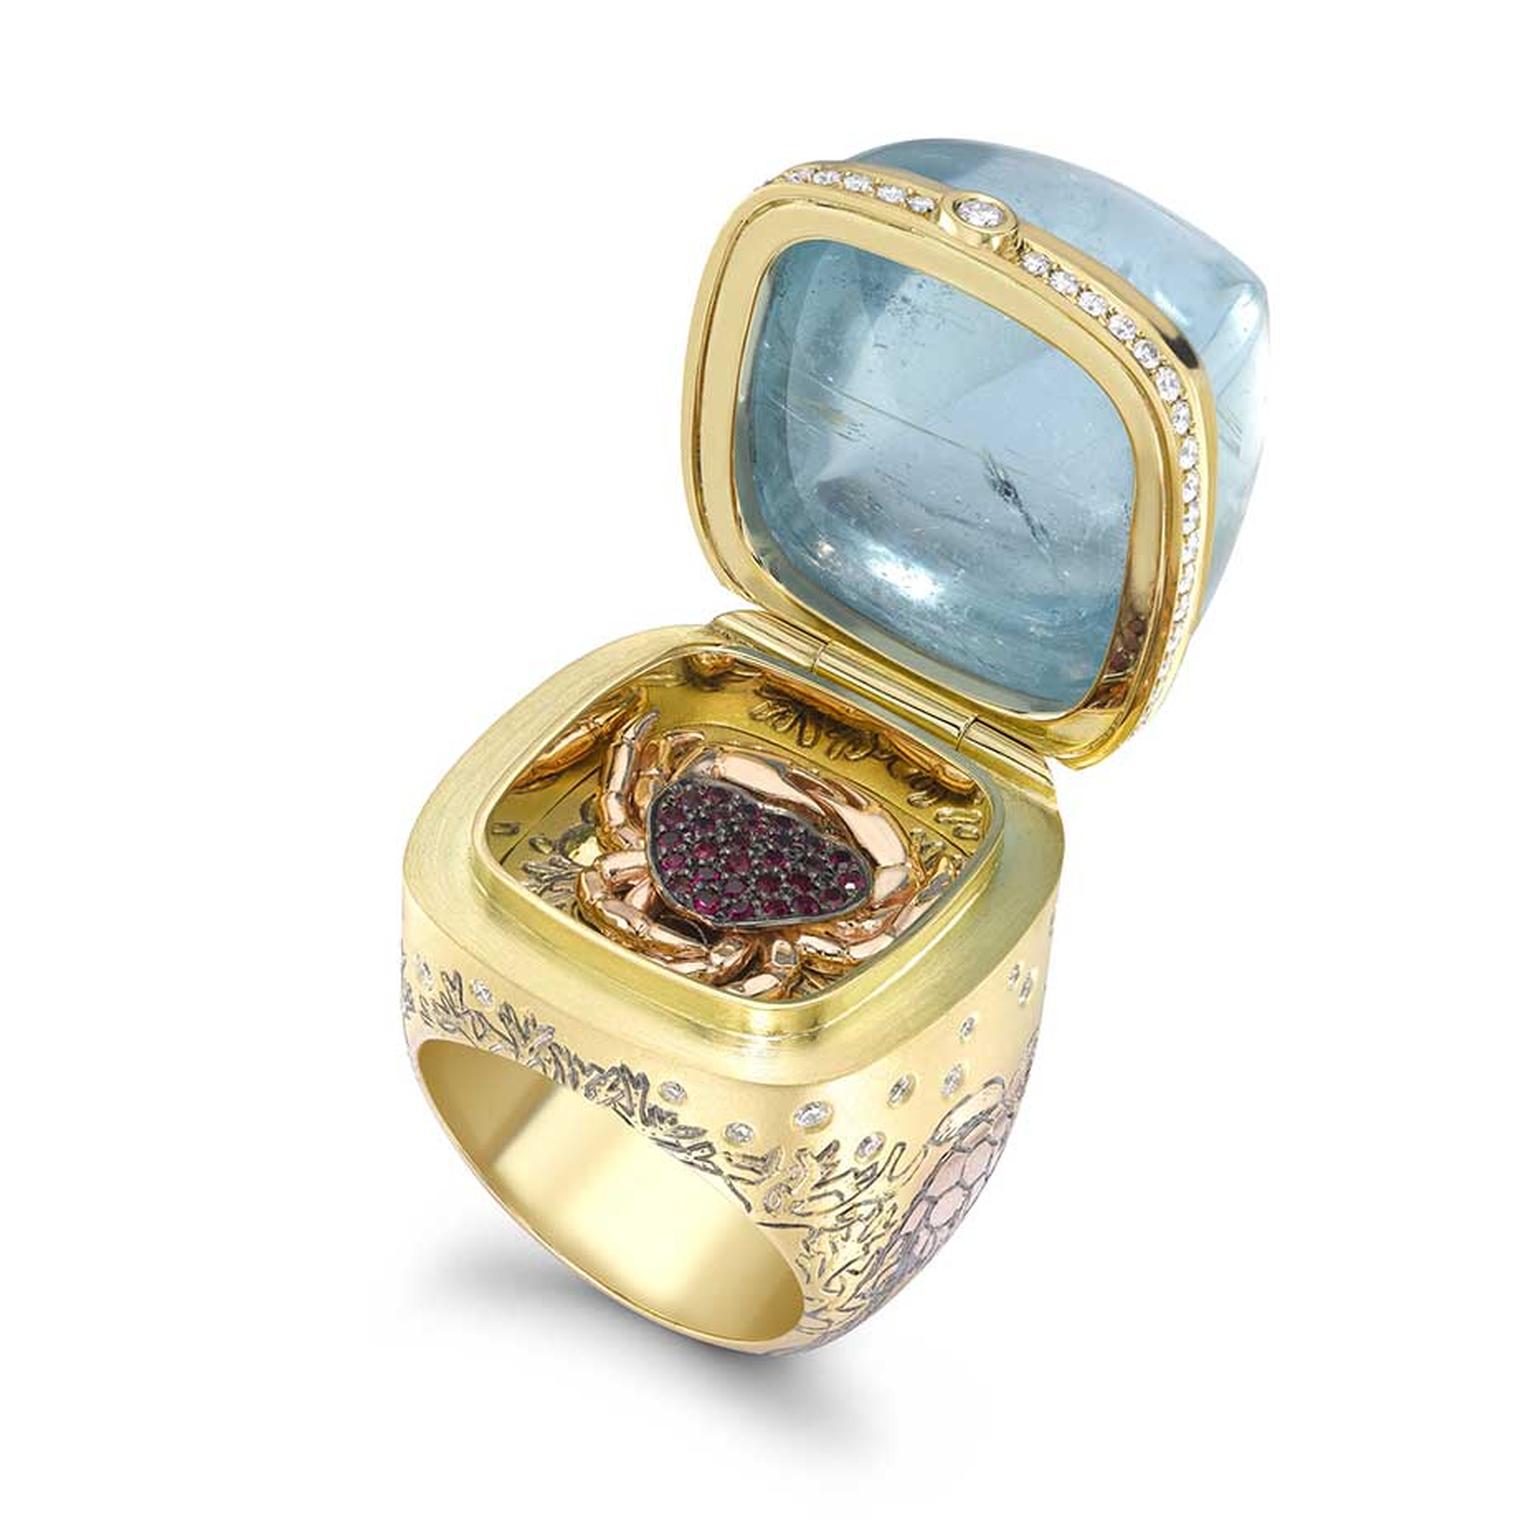 Theo Fennell Hermitage opening ring in yellow, rose and white gold with a 64.53ct cabochon aquamarine, rubies and diamonds.